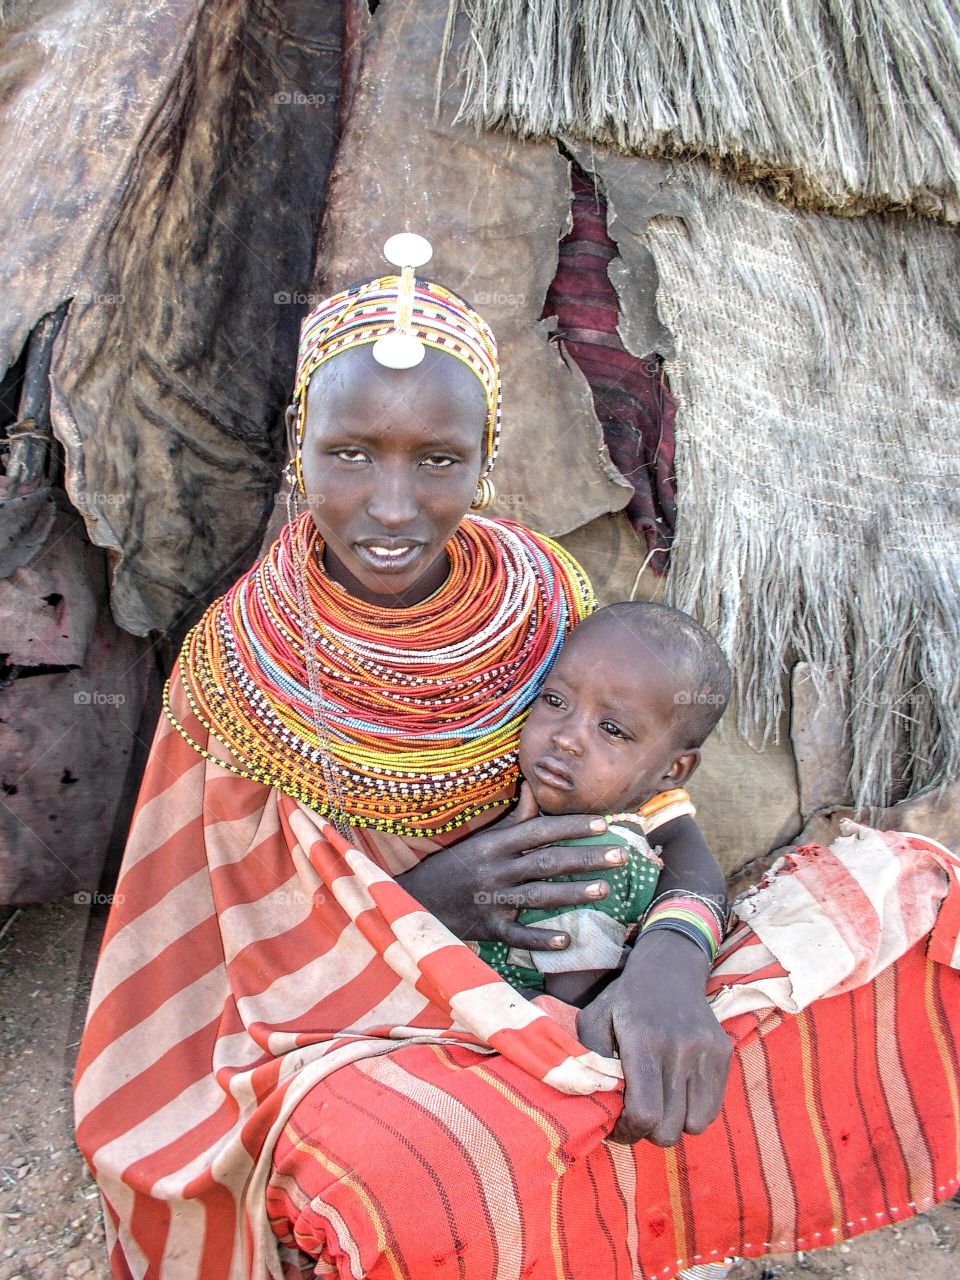 Rendille Family; Korr, Northern Kenya - all proceeds will go to Dubsahai Tribe
Madonna and child :)